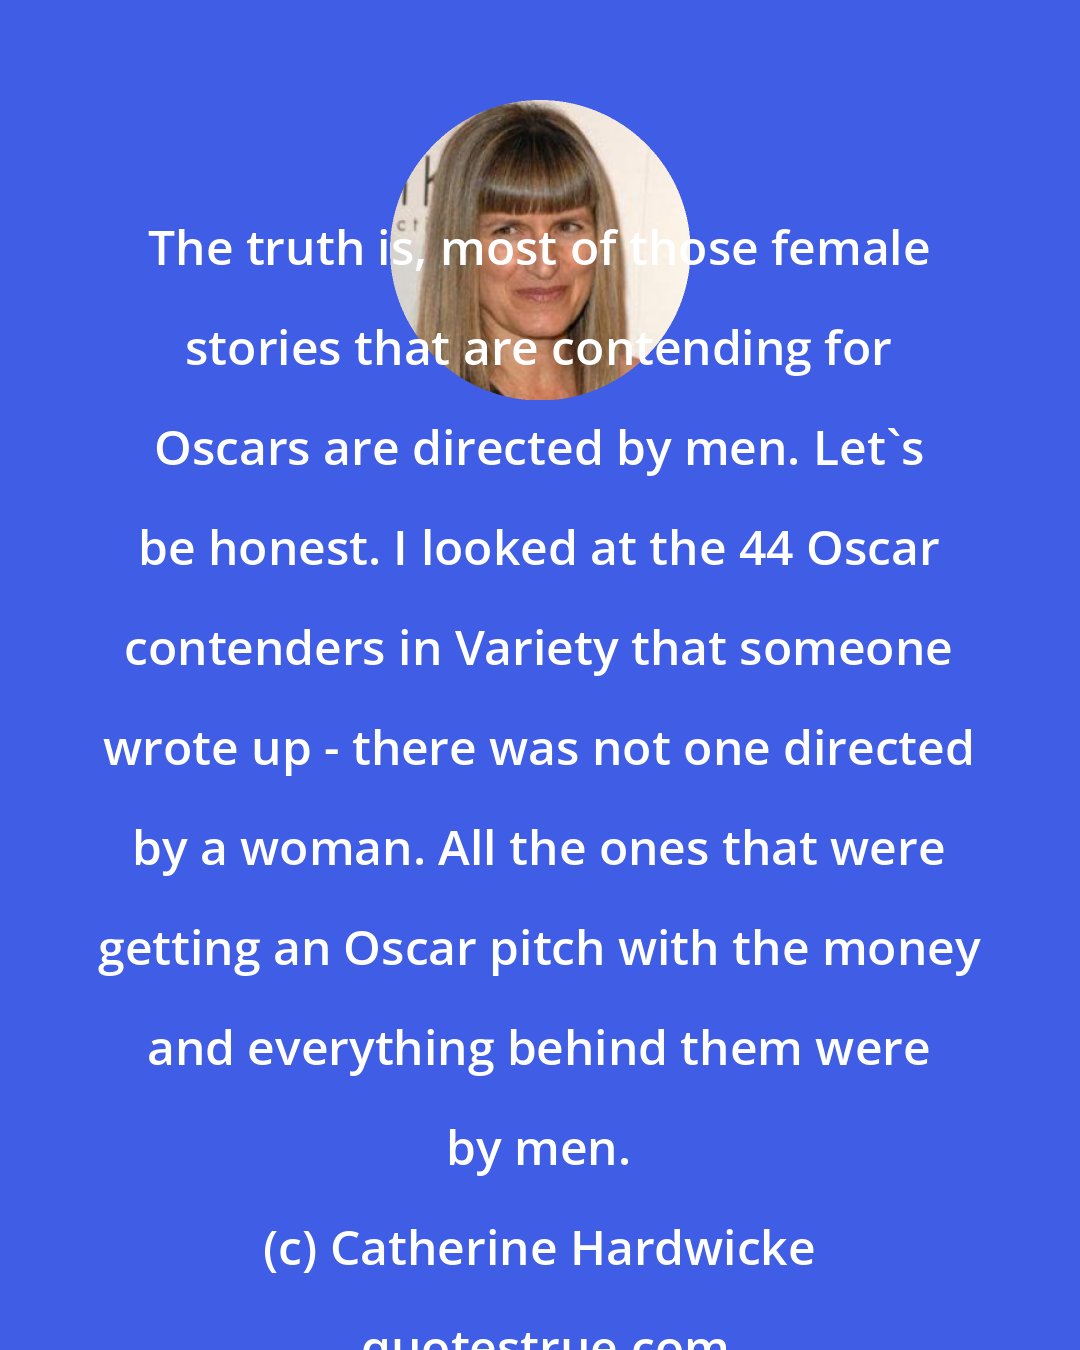 Catherine Hardwicke: The truth is, most of those female stories that are contending for Oscars are directed by men. Let's be honest. I looked at the 44 Oscar contenders in Variety that someone wrote up - there was not one directed by a woman. All the ones that were getting an Oscar pitch with the money and everything behind them were by men.